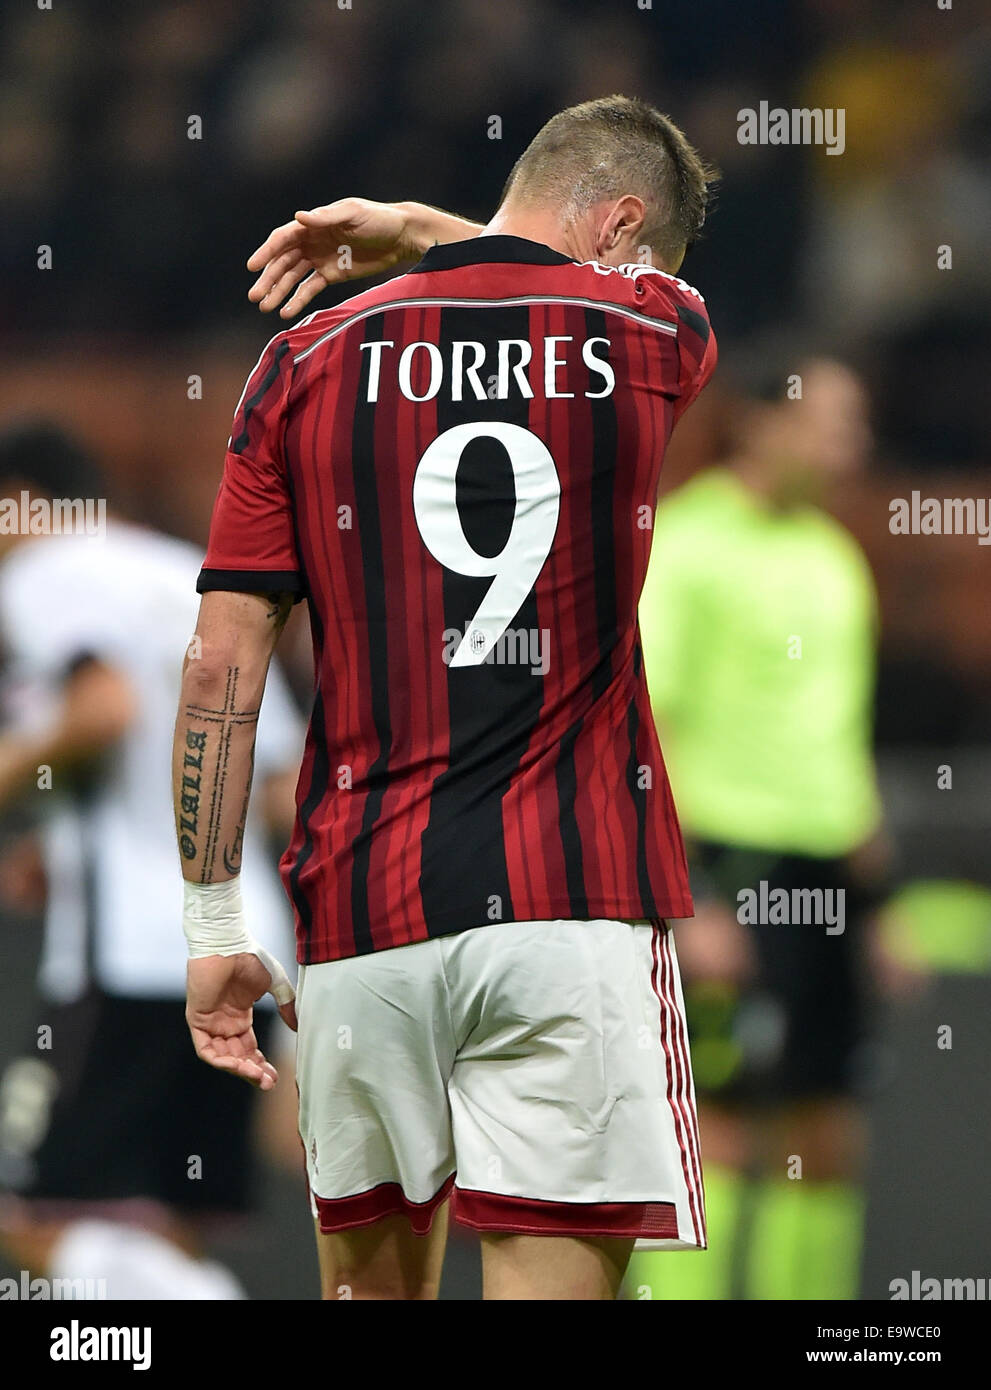 Milan, Italy. 2nd Nov, 2014. Fernando Torres of AC Milan reacts during the  Serie A football match against Palermo in Milan, Italy, on Nov. 2, 2014. AC  Milan lost 0-2. © Alberto